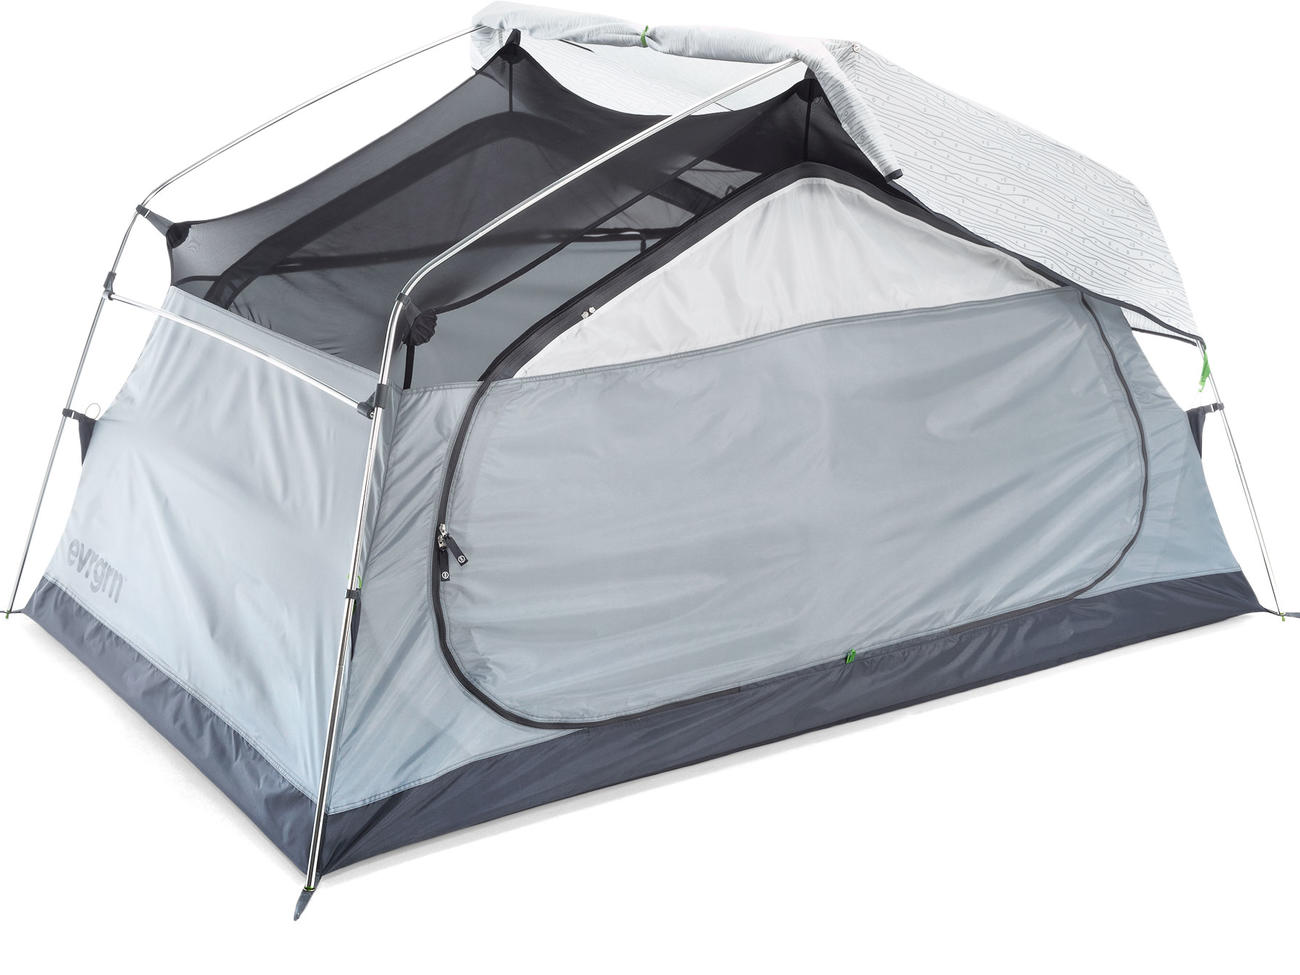 25 days of giveaways: Evrgrn’s Starry Night 2P tent